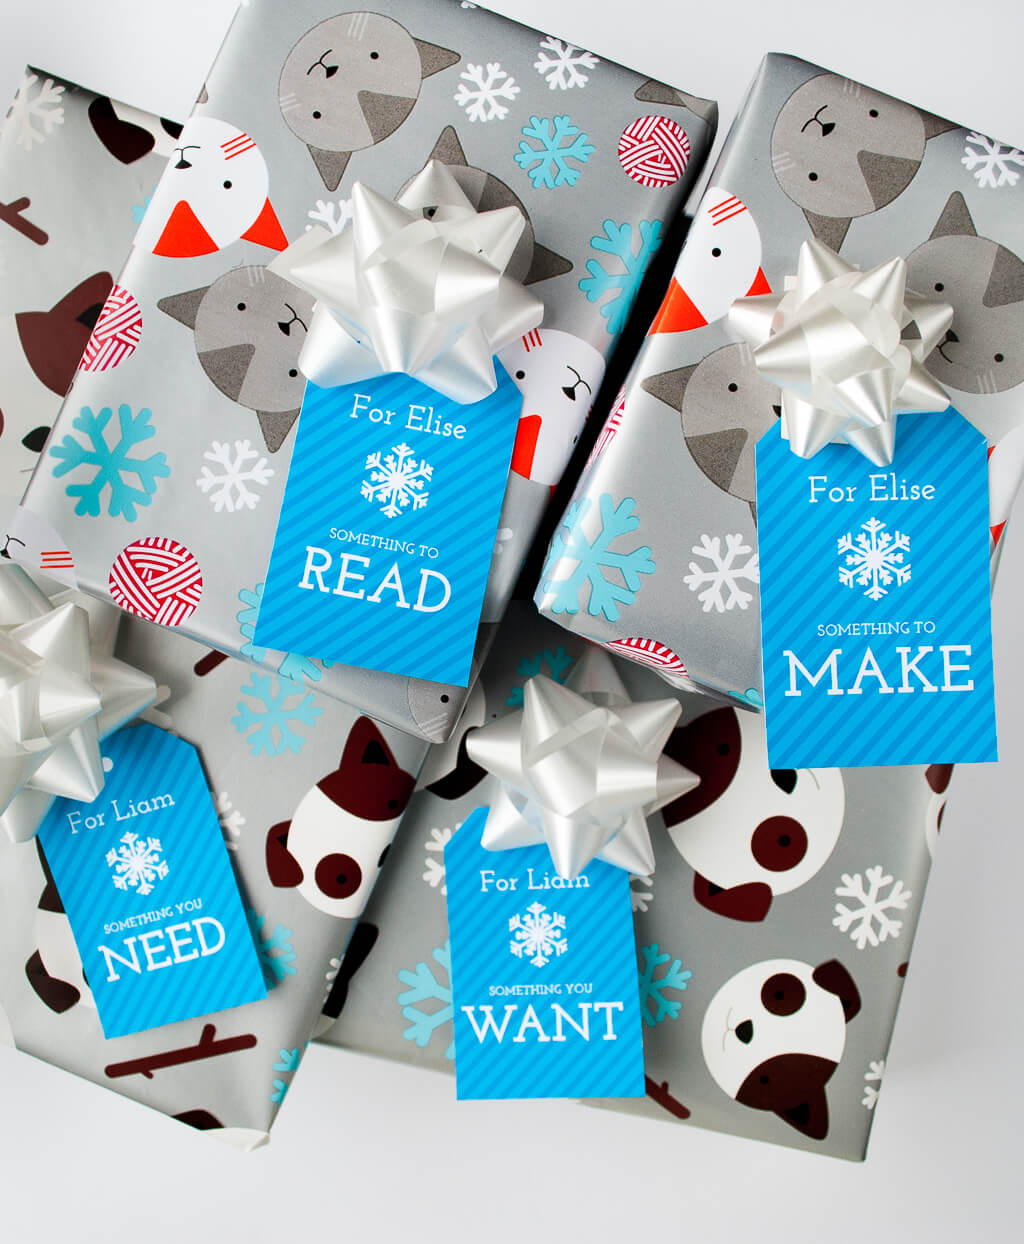 Free printable Four Gift Christmas gift tags in blue. It's changed our holidays for the better to give just four thoughtful Christmas gifts to each kid: Want, Need, Make, Read. Download the free printable Christmas gift tags, type to personalize, and print! #christmas #christmasgifts #giftwrapping #gifttags #freeprintable #printable